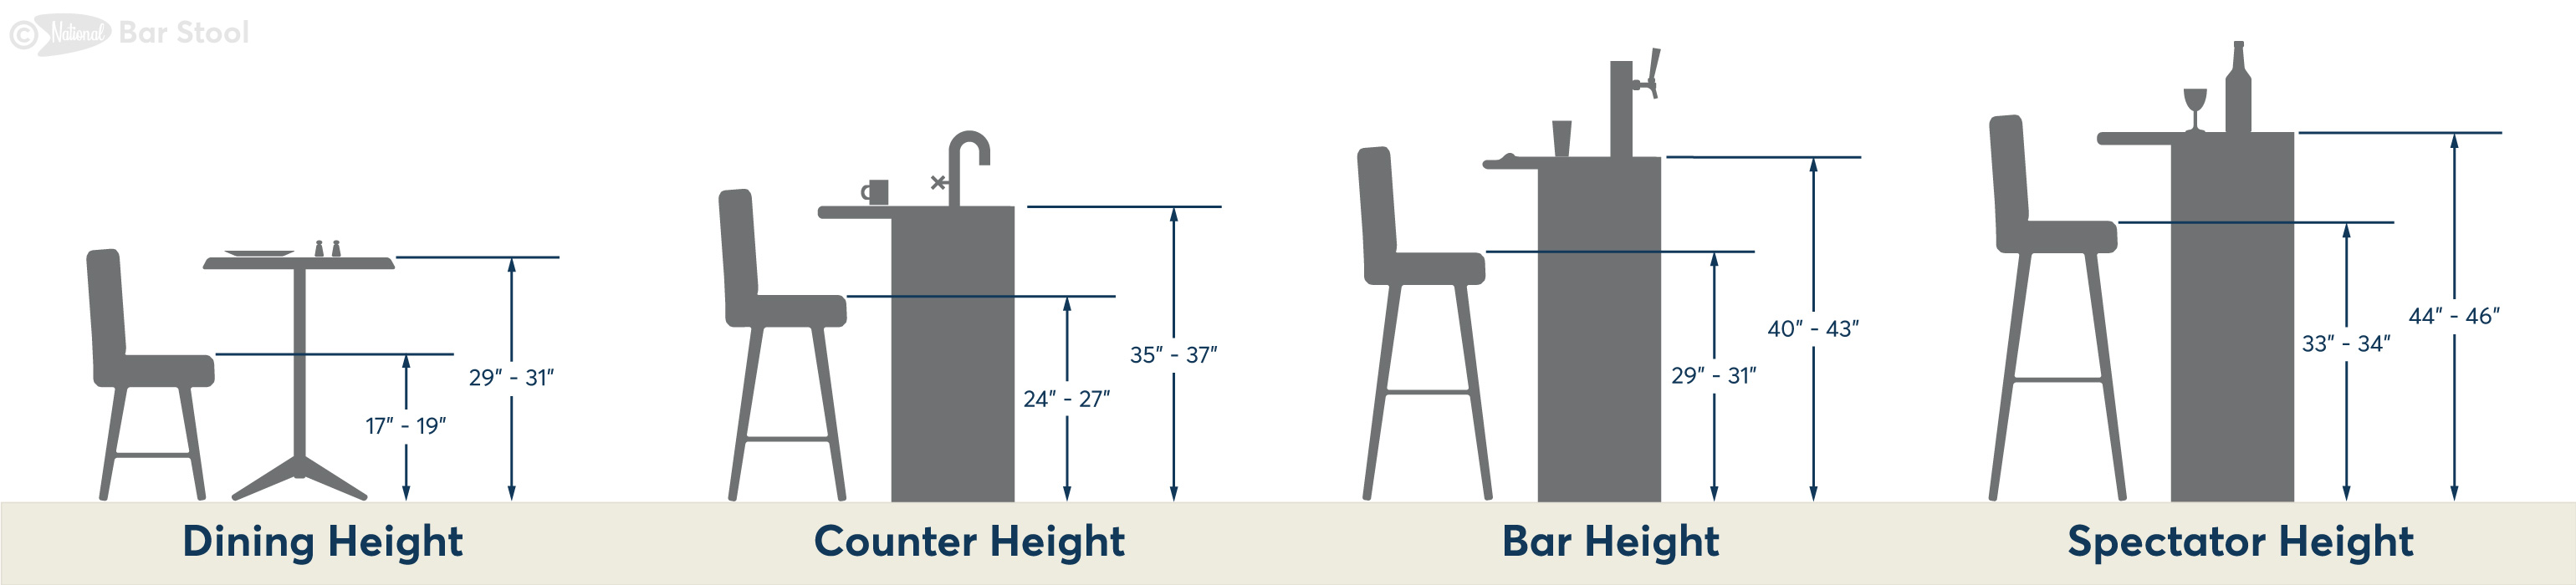 Bar Stool Ing Guide National, Bar Stool Measurements For Heights